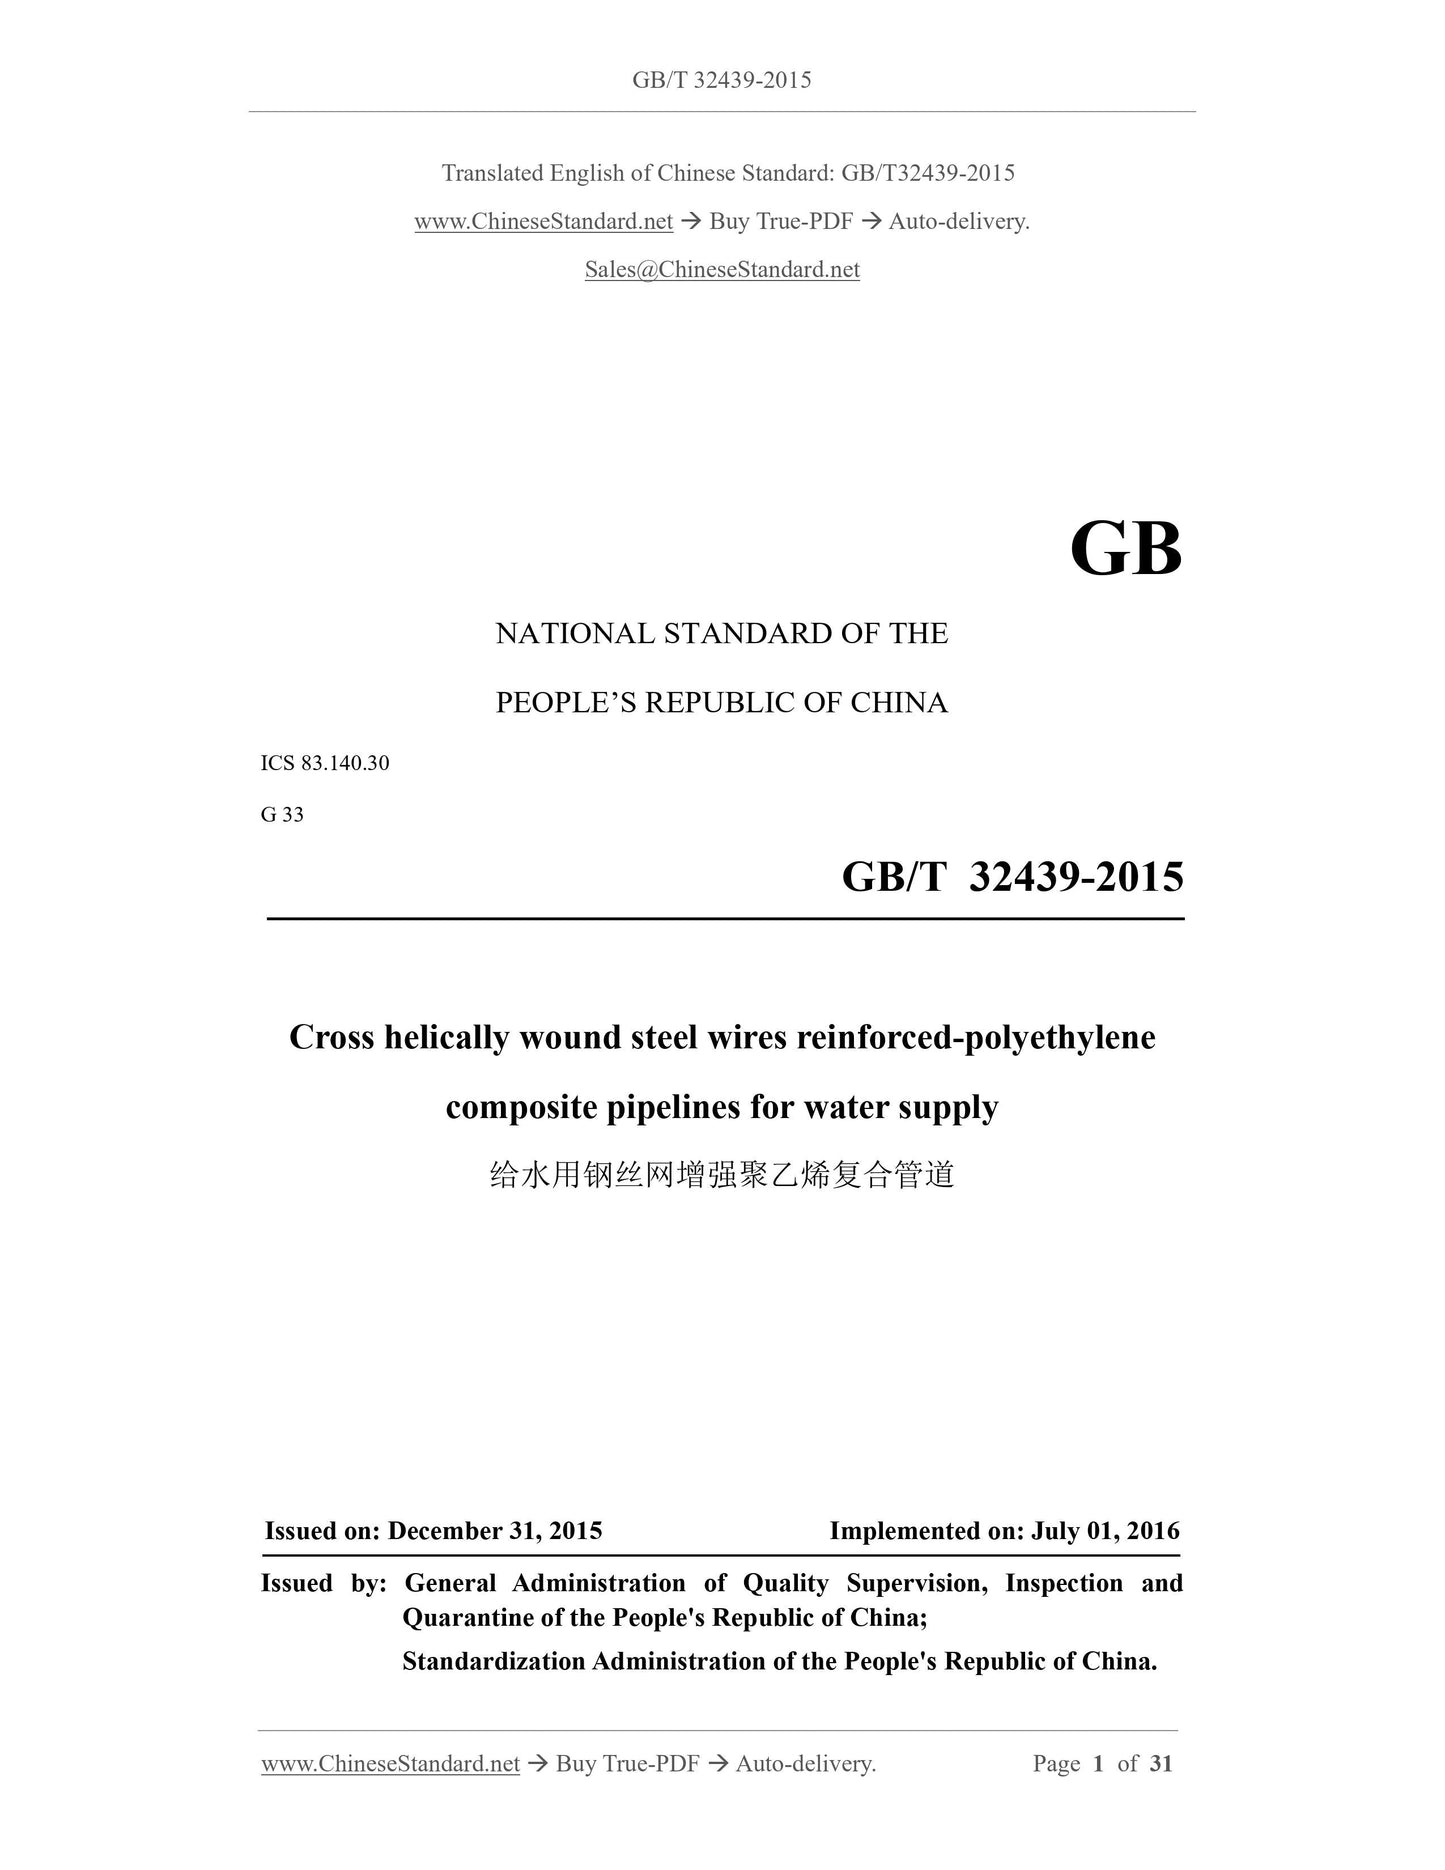 GB/T 32439-2015 Page 1